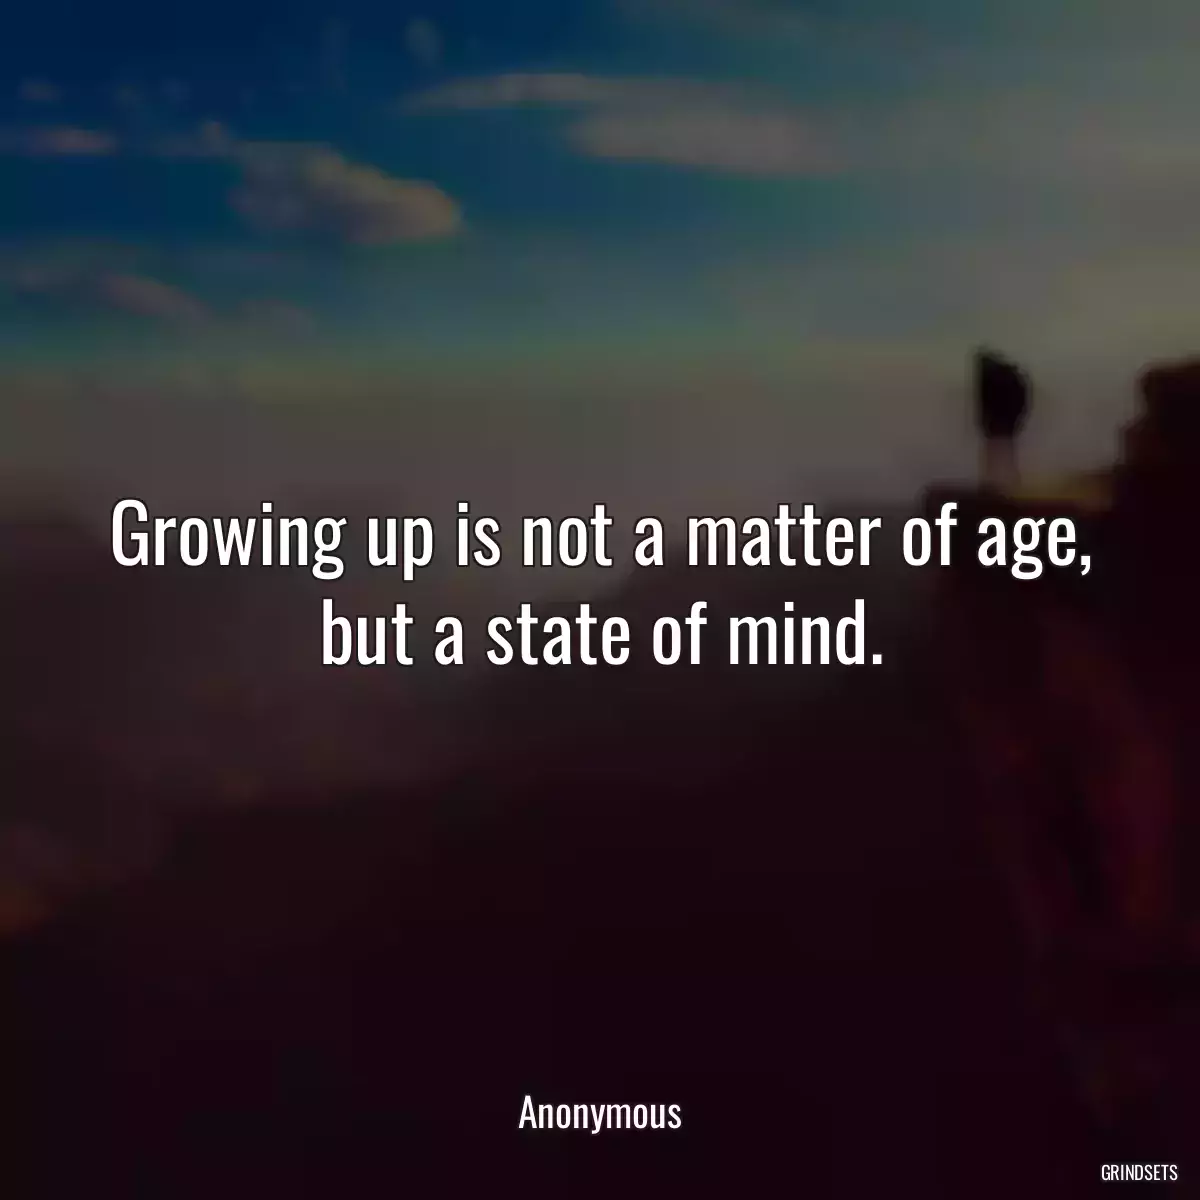 Growing up is not a matter of age, but a state of mind.